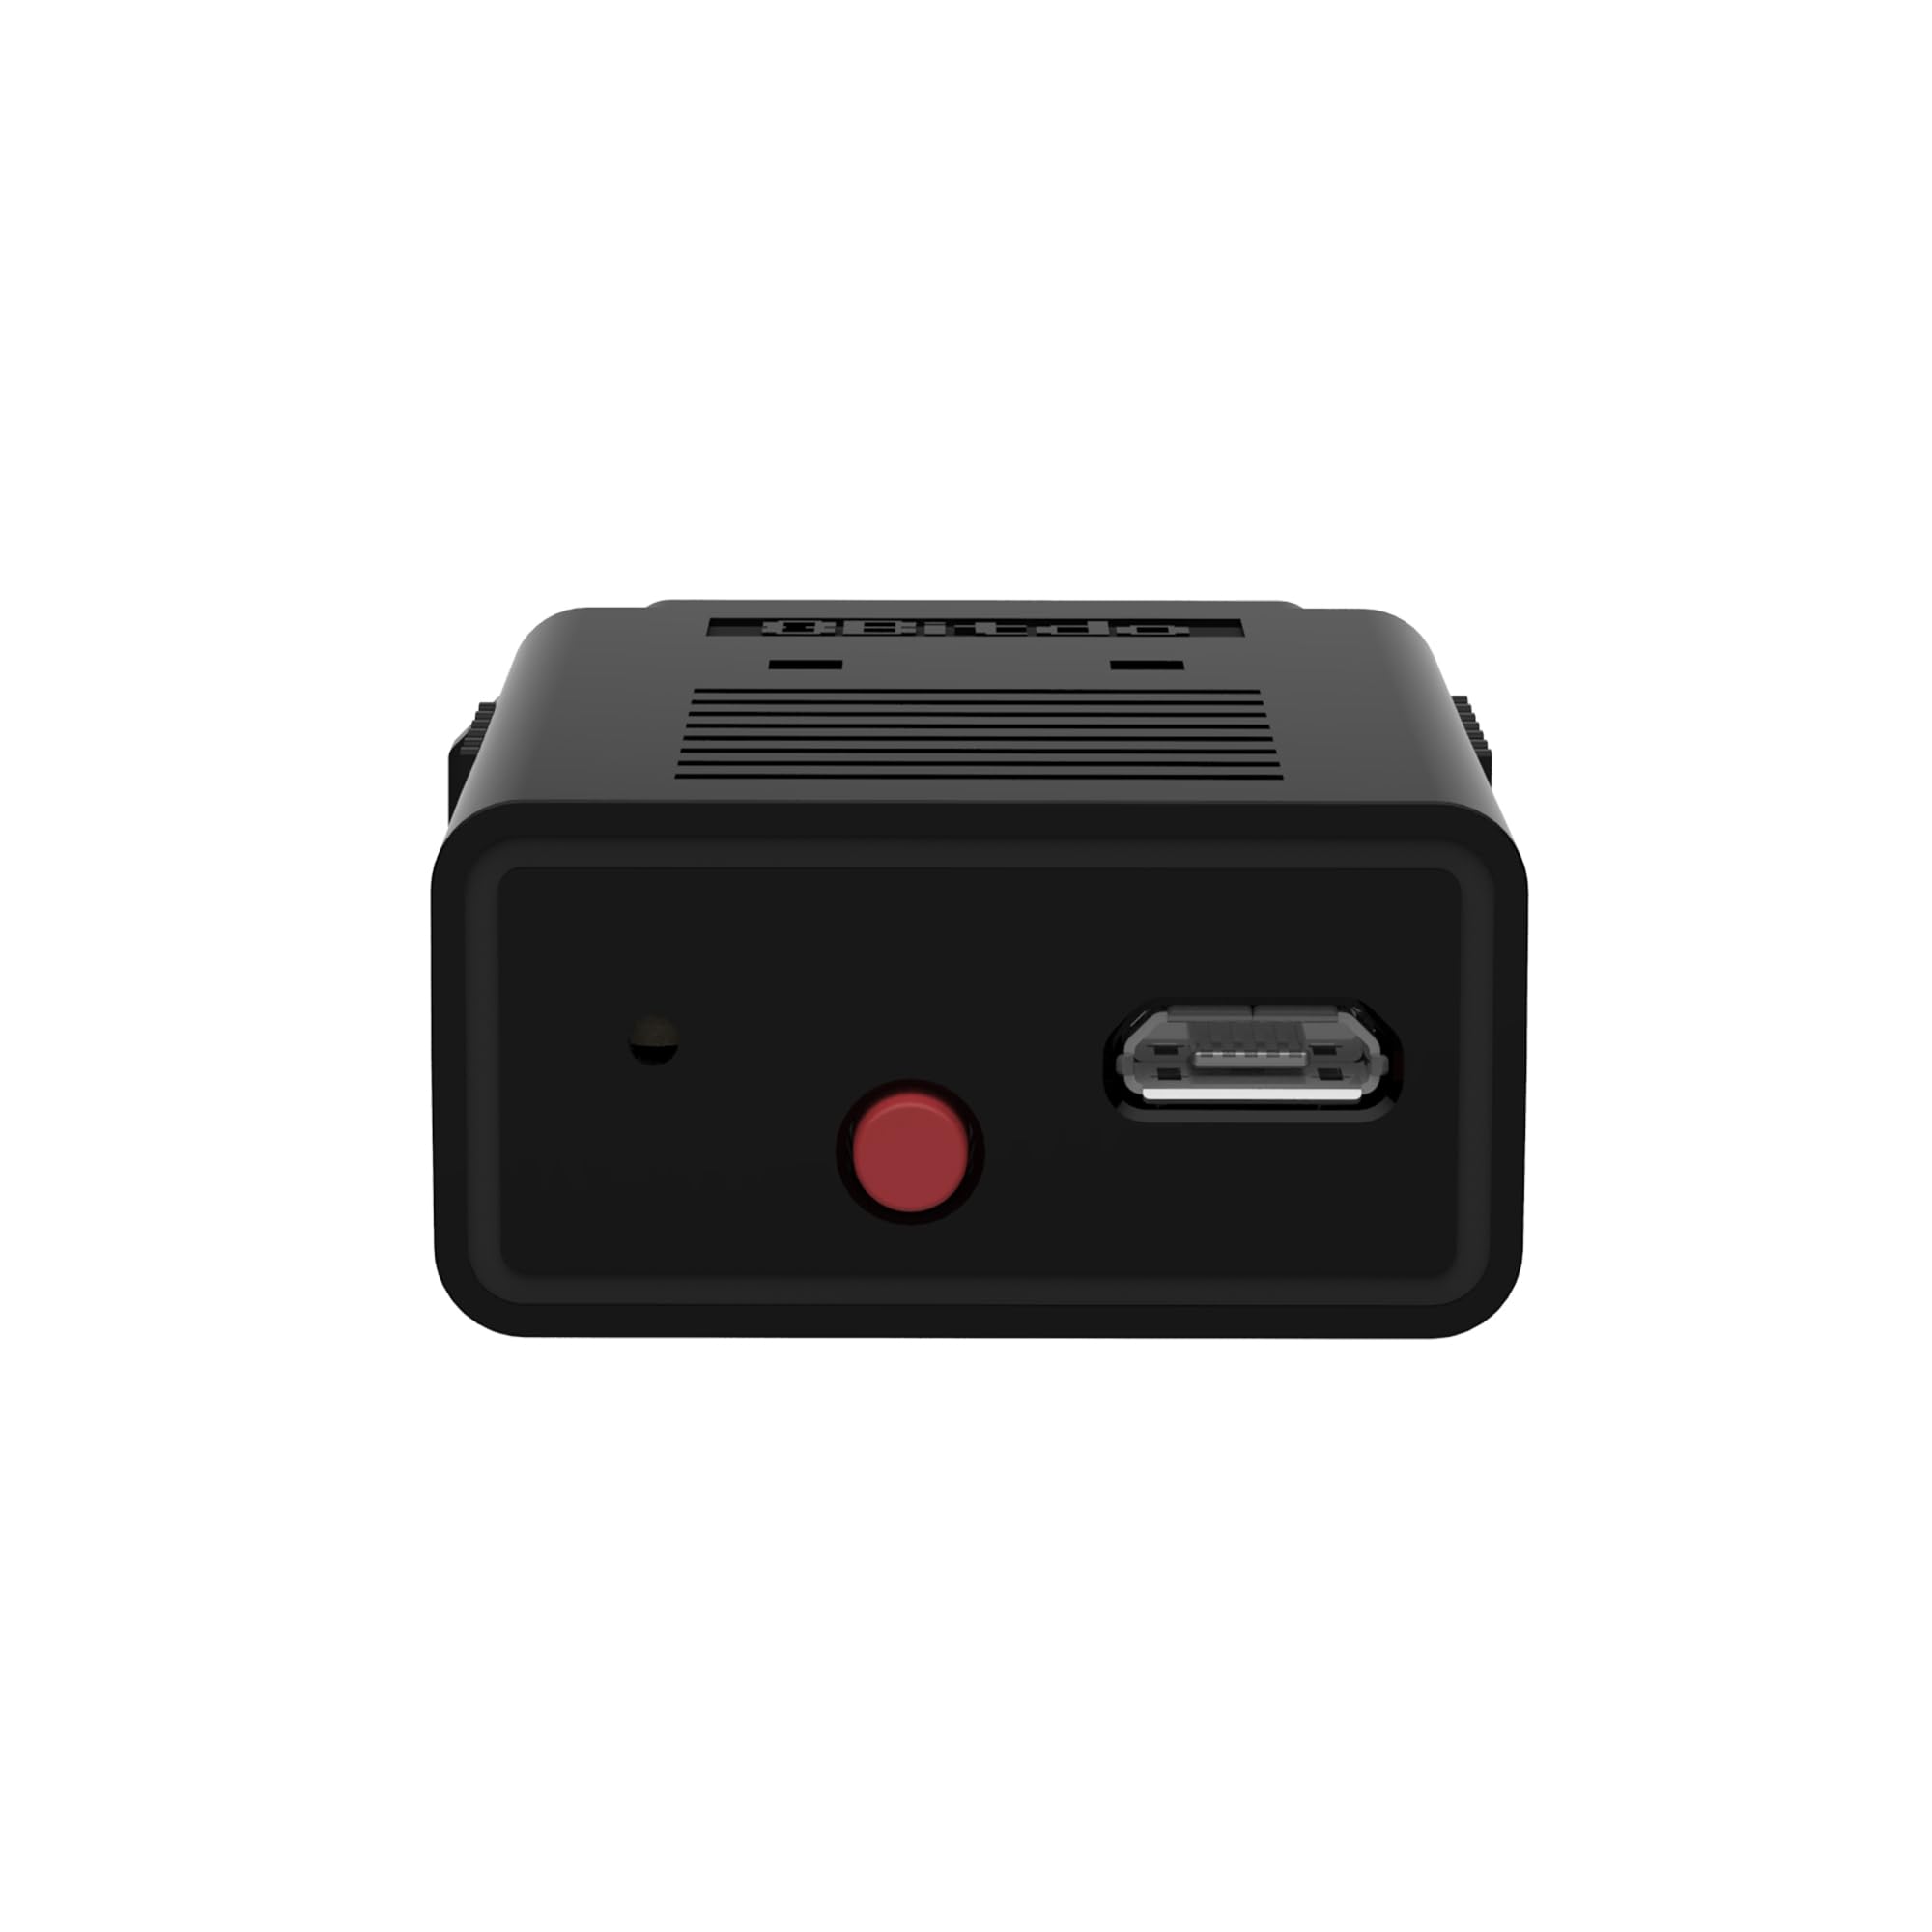 8Bitdo Bluetooth Retro Receiver for Original NES, Compatible with DualShock 3, DualShock 4, Wiimote, Wii U Pro, Switch Joy-Cons, Switch Pro Bluetooth Controllers